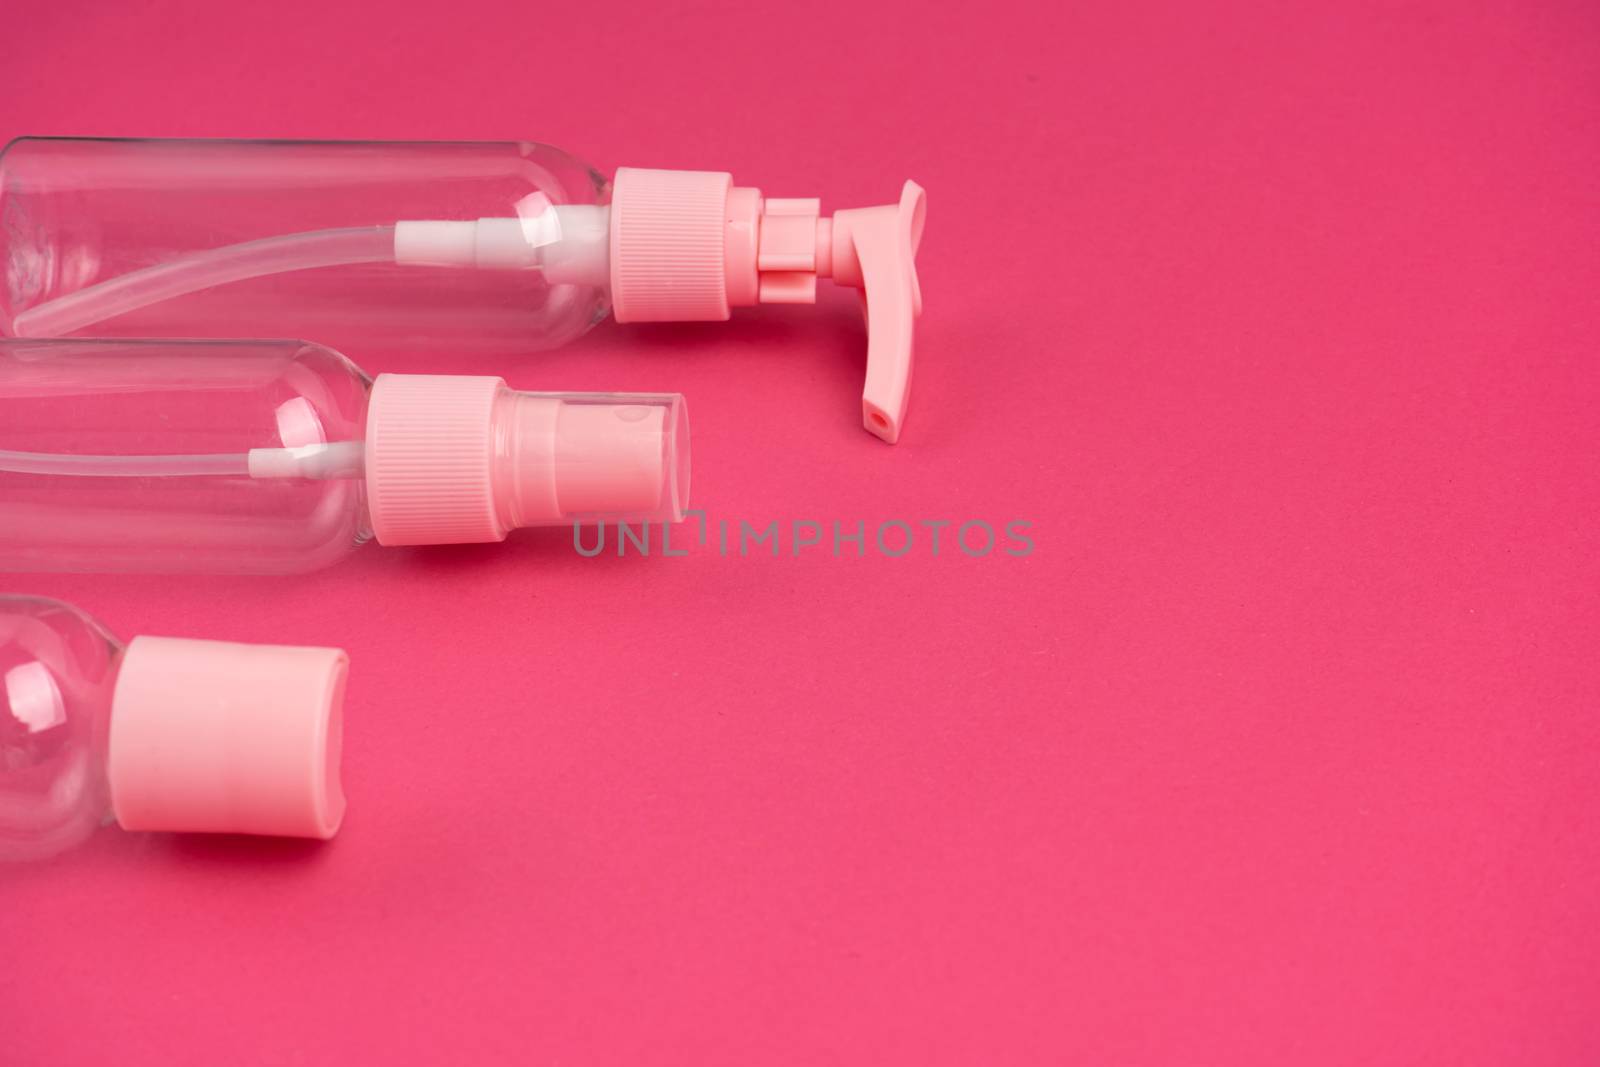 A kit of plastic containers for transportation of shampoos, creams and cosmetics in travel by Try_my_best